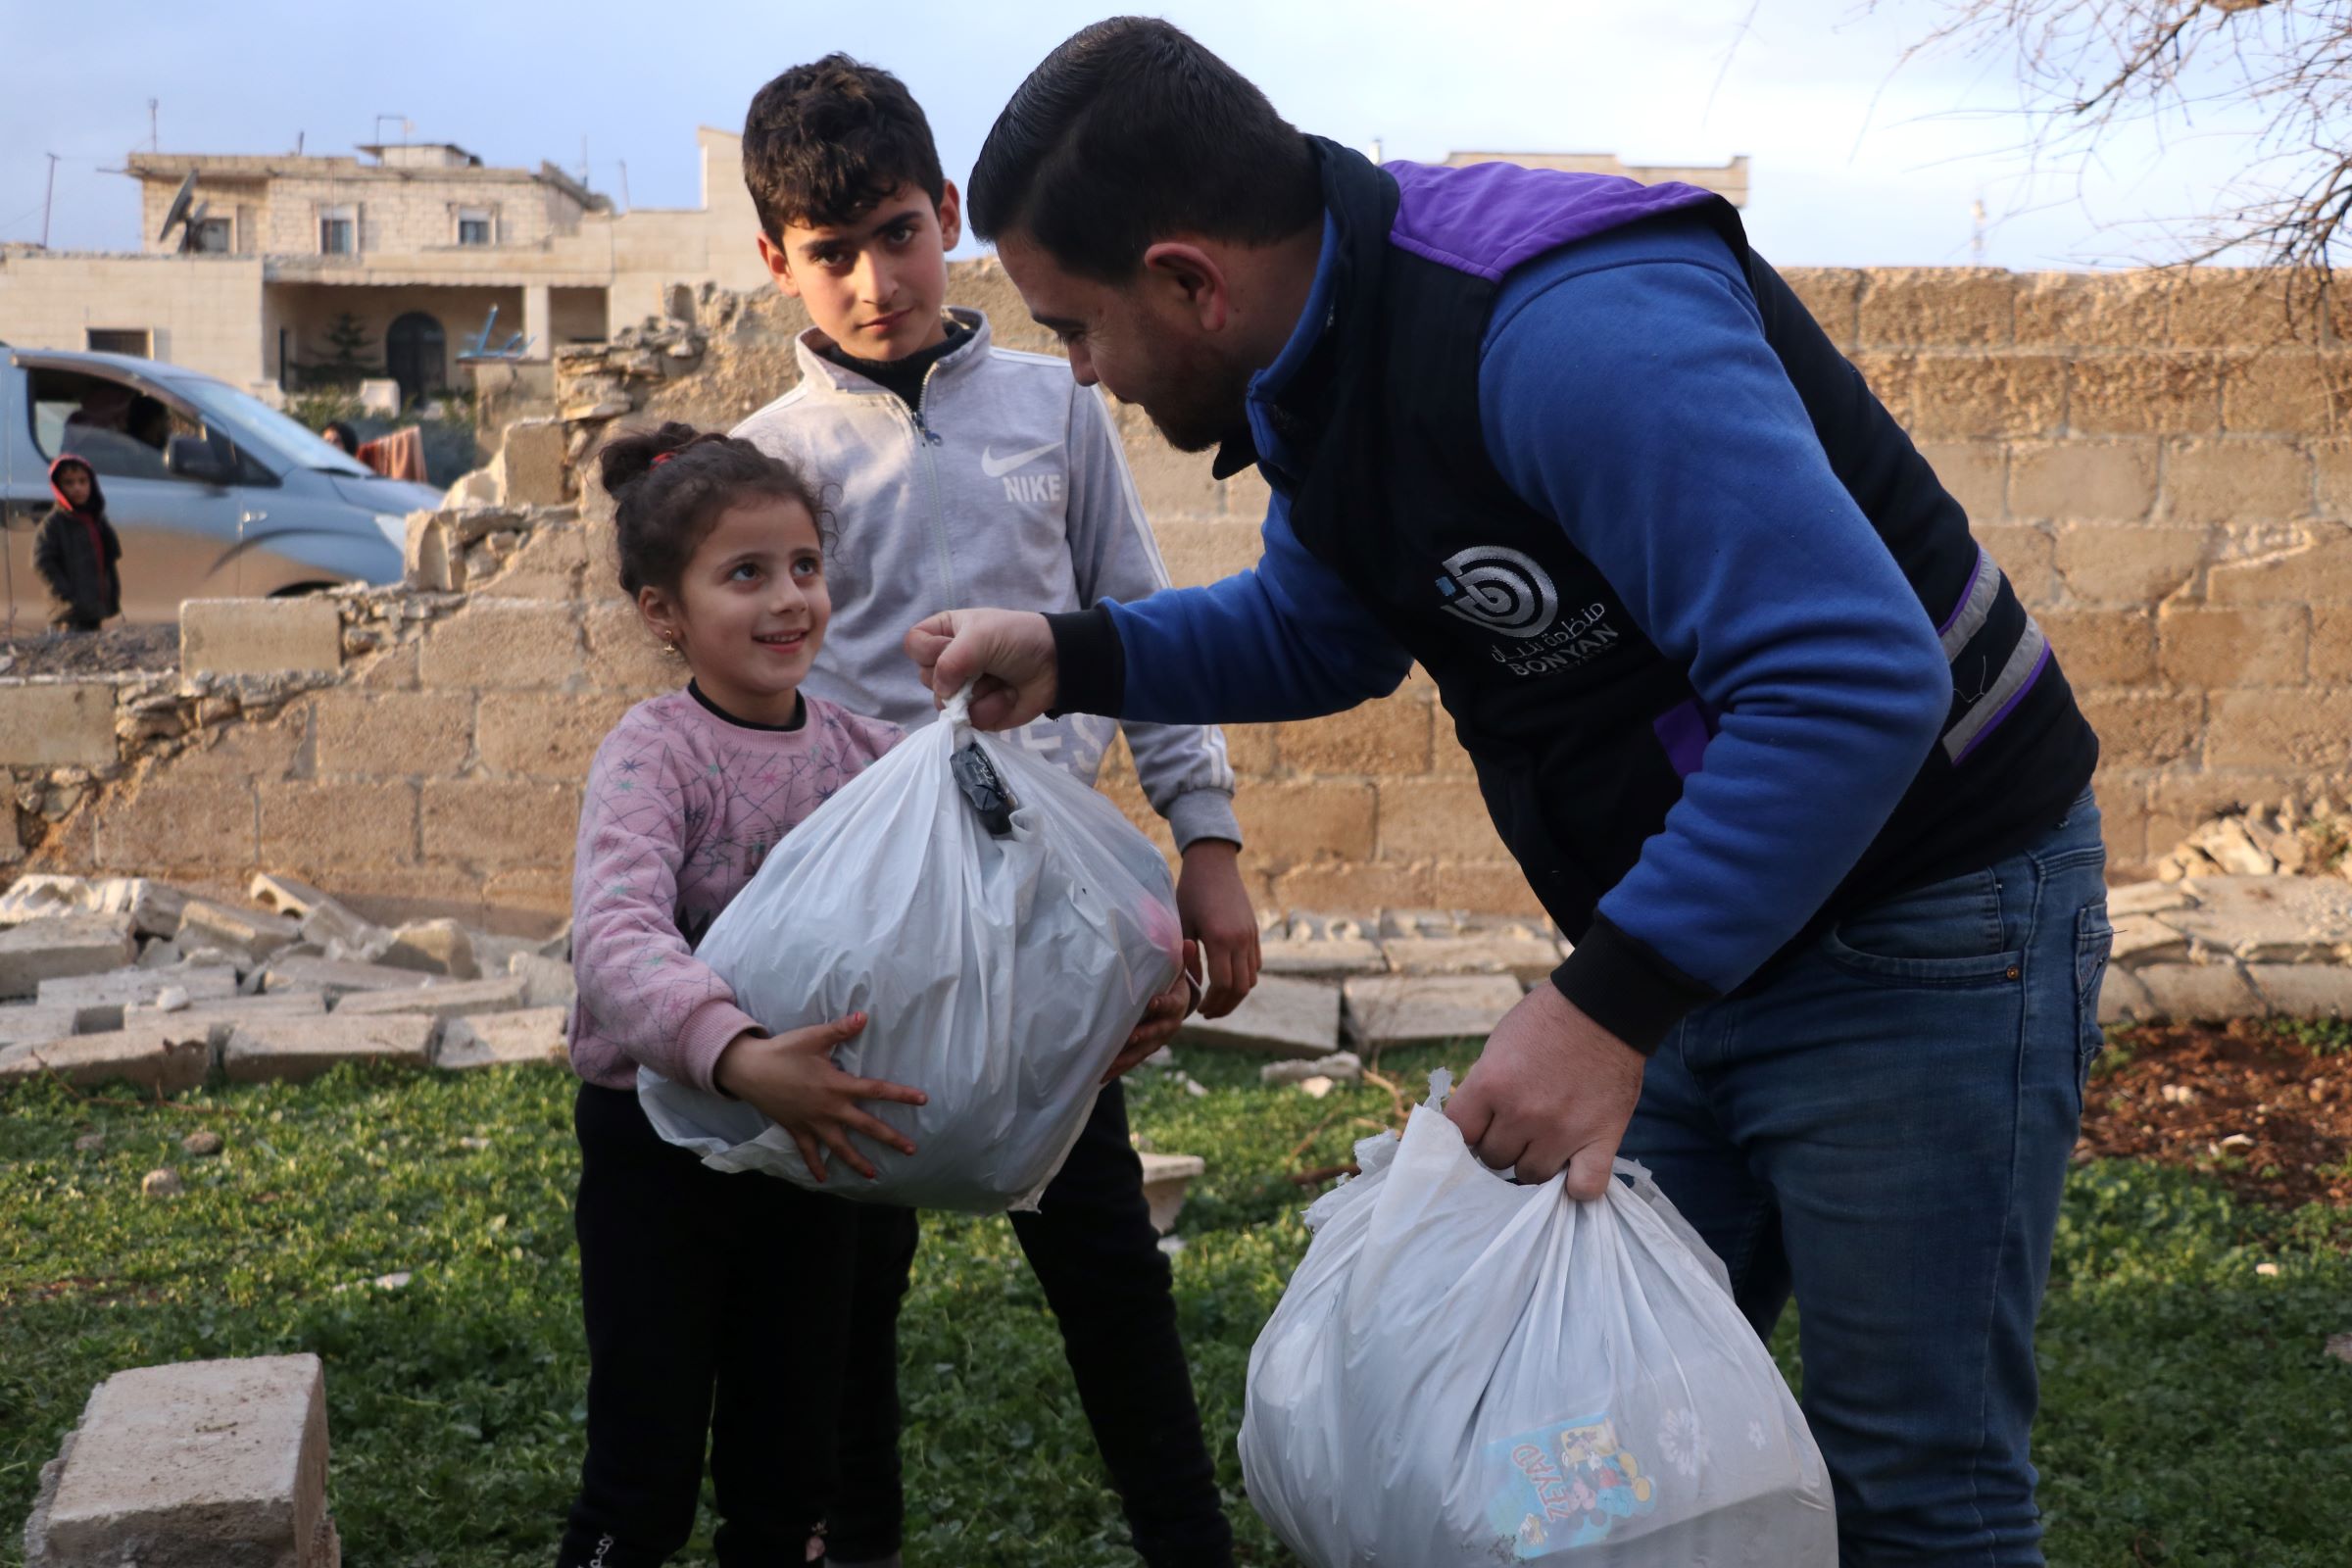 Two children, a girl and an older boy, receive a bag with aid supplies from an emergency response worker of our local partner organization Bonyan. Both are smiling. A collapsed wall can be seen in the background.